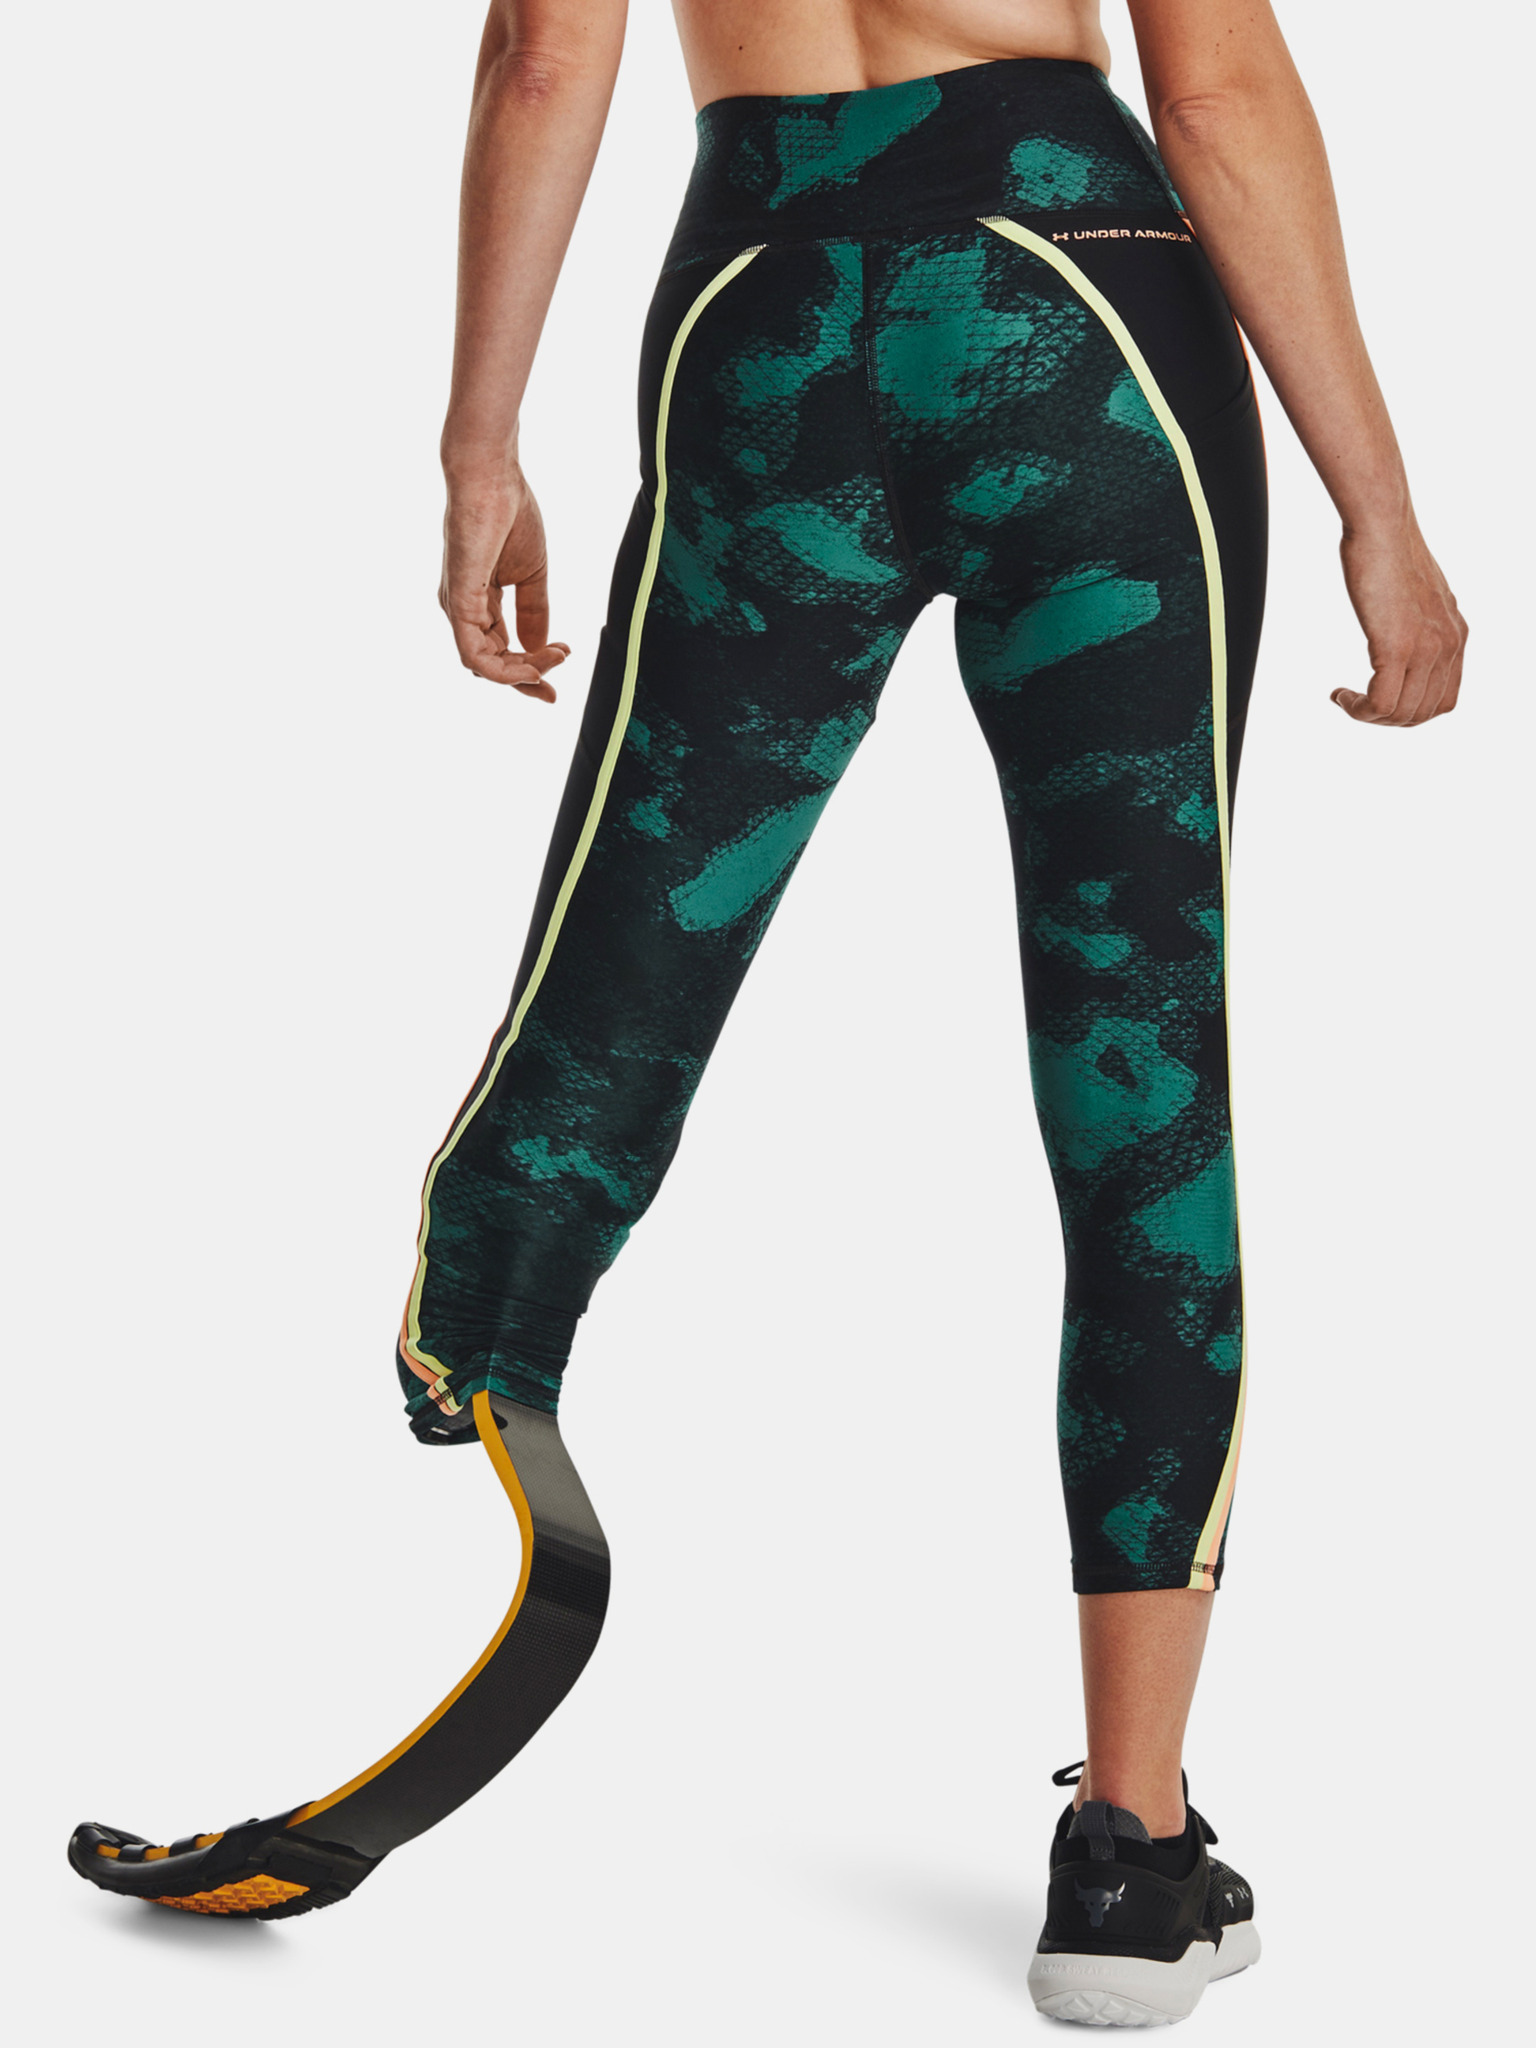 Project Huscle Amplify Leggings – Project Huscle